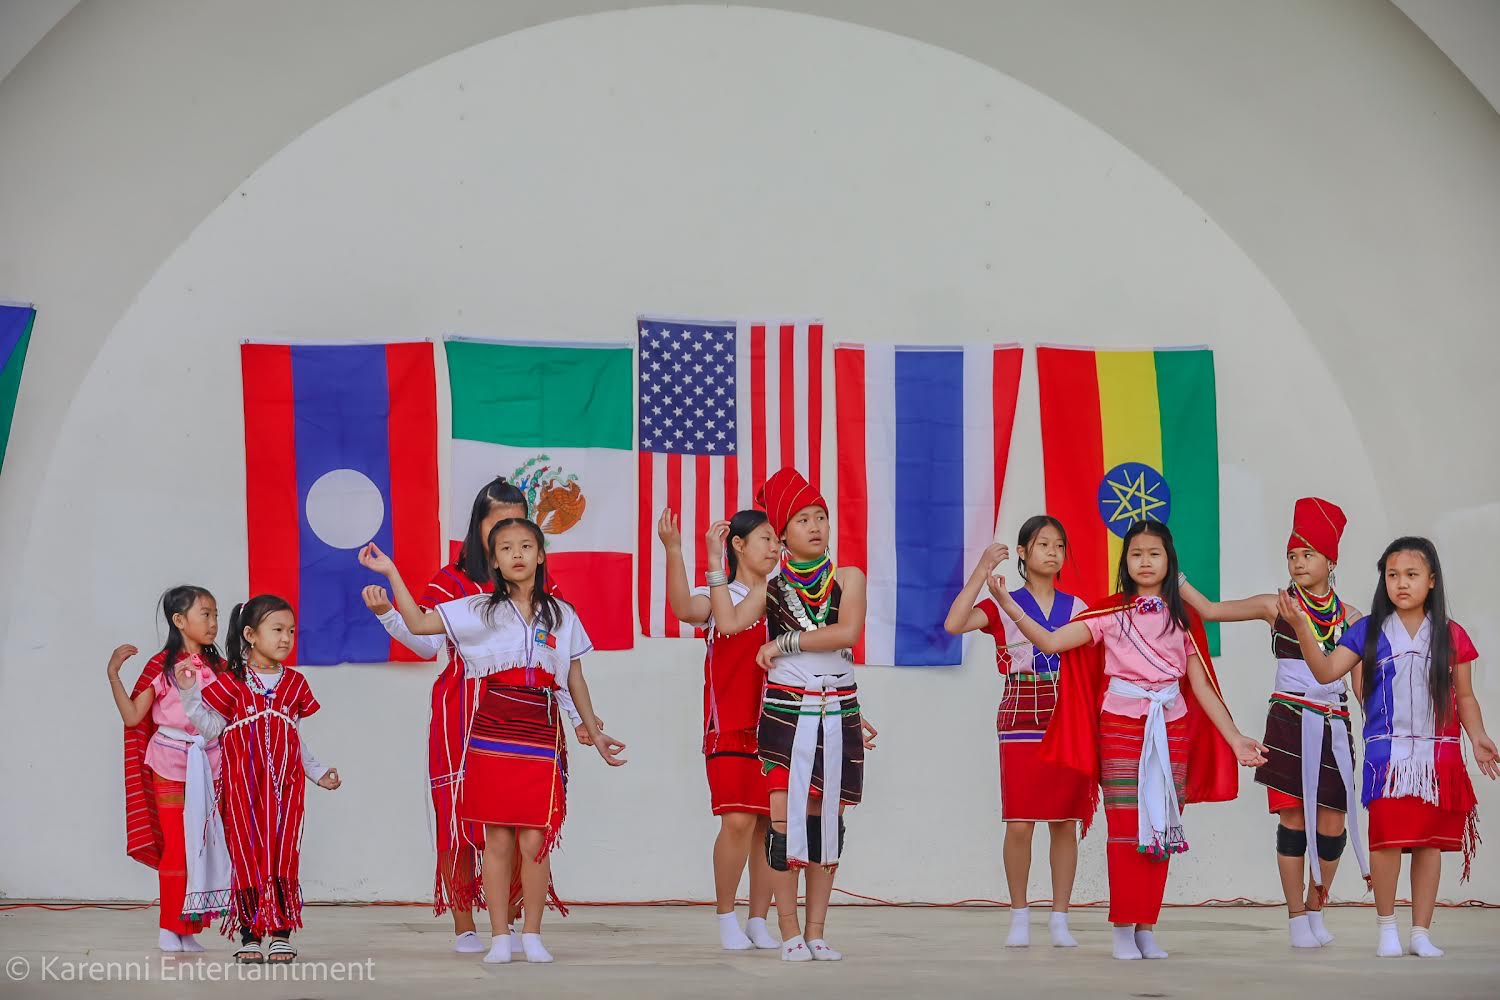 Ten children in traditional Hmong clothing dancing in front of a wall with flags of various countries.